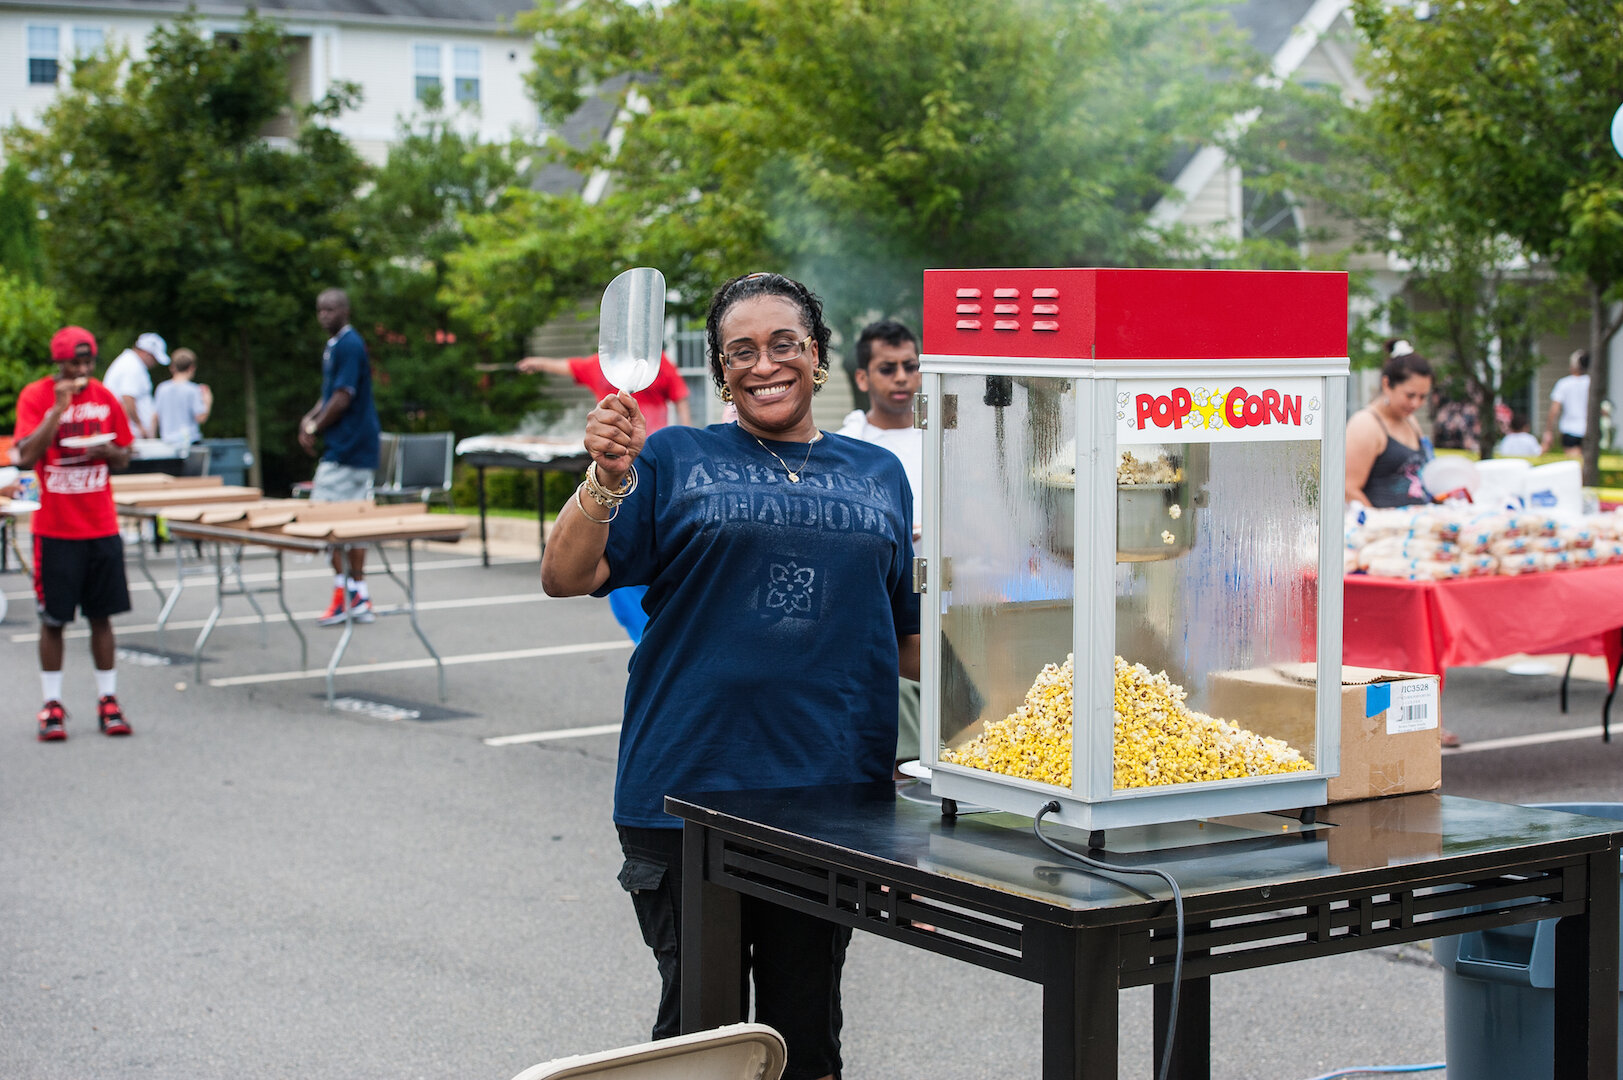  Popcorn for everyone! Ashburn Meadows neighbors come together at a community event. 